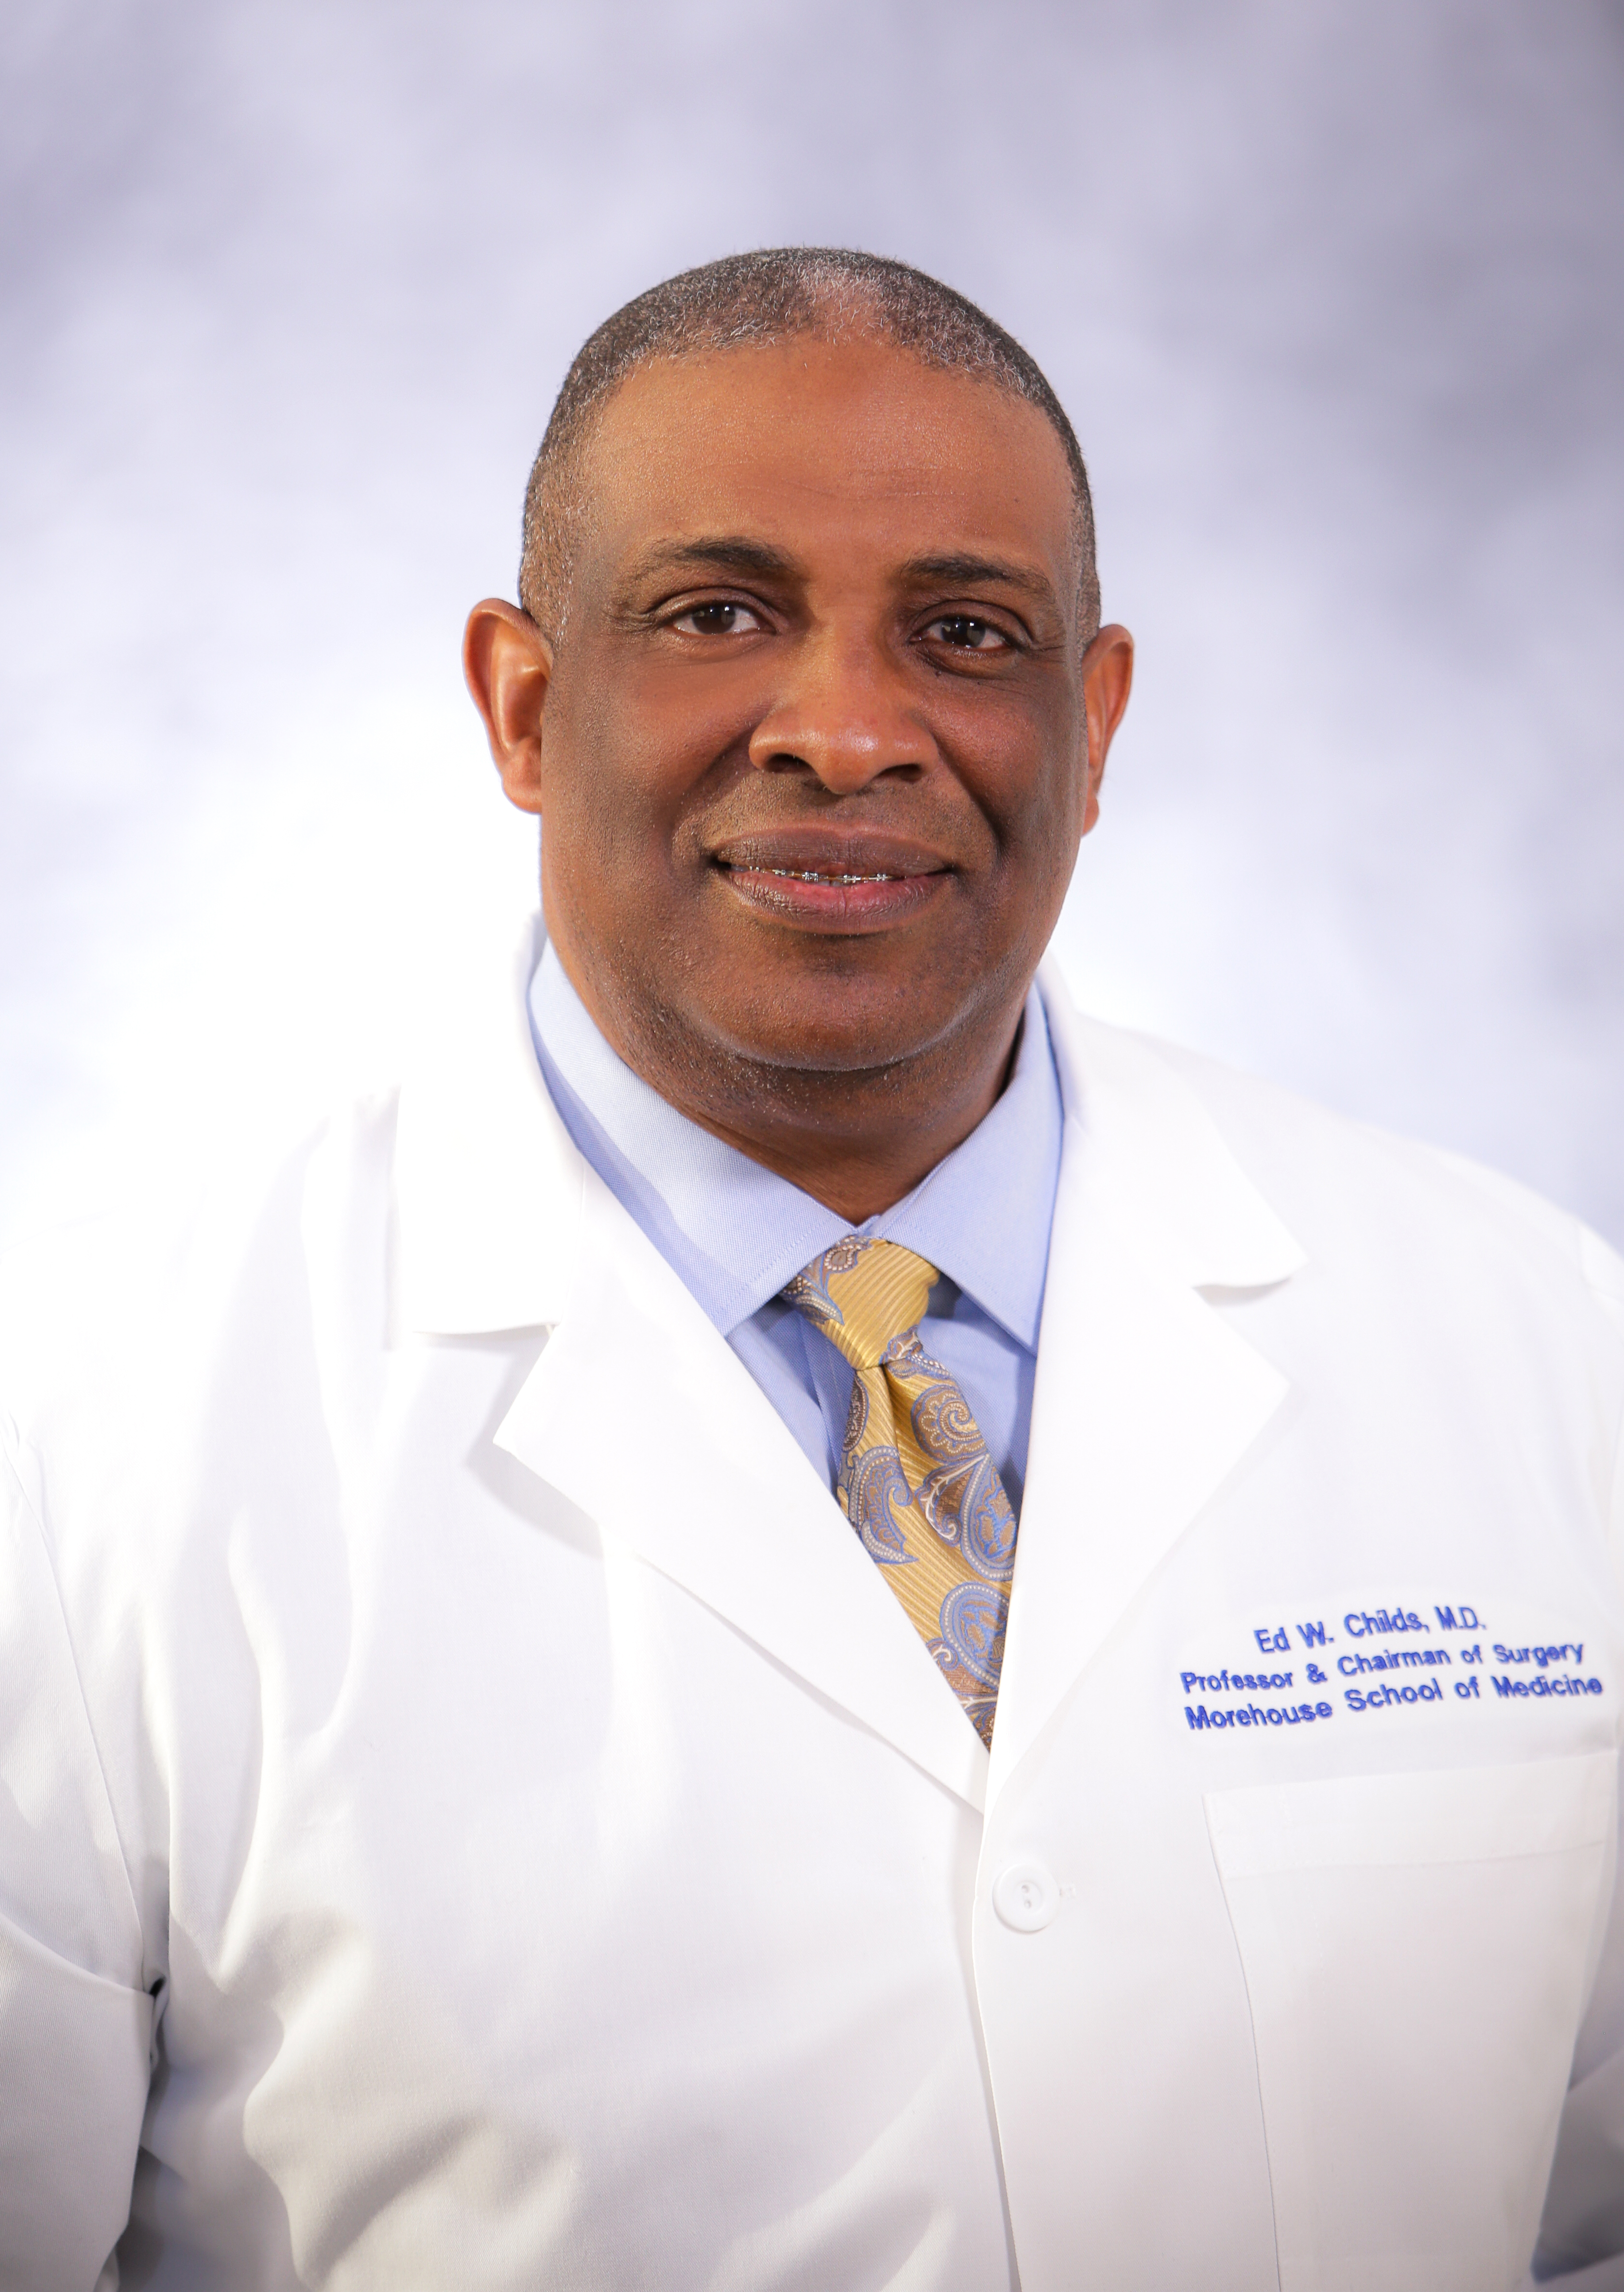 Ed W. Childs, MD, FACS